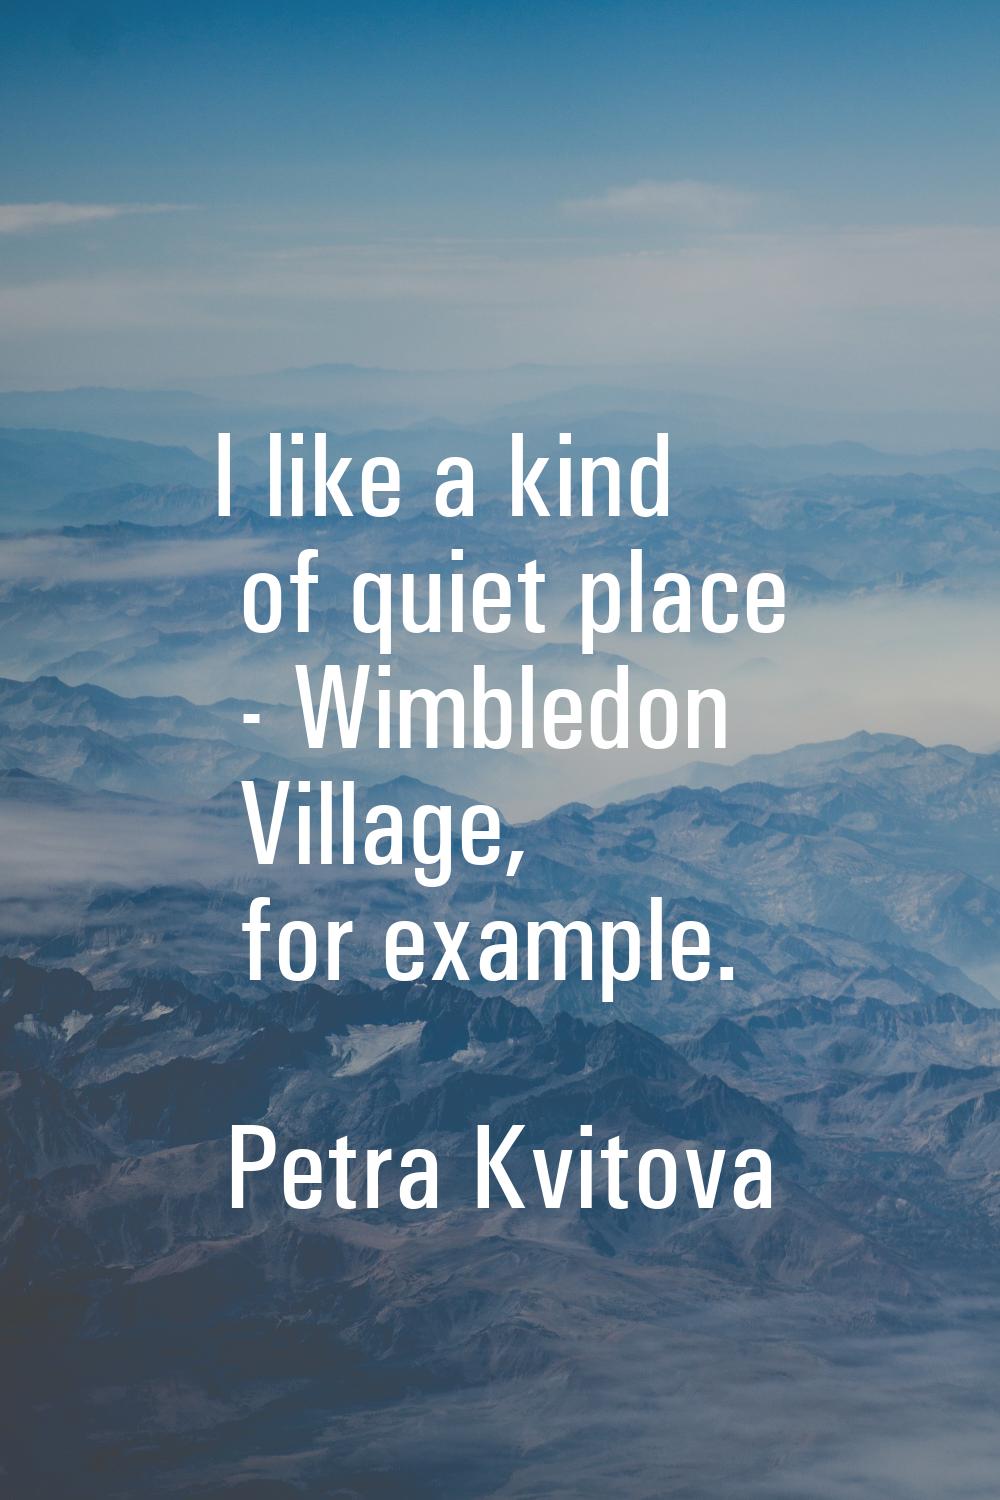 I like a kind of quiet place - Wimbledon Village, for example.